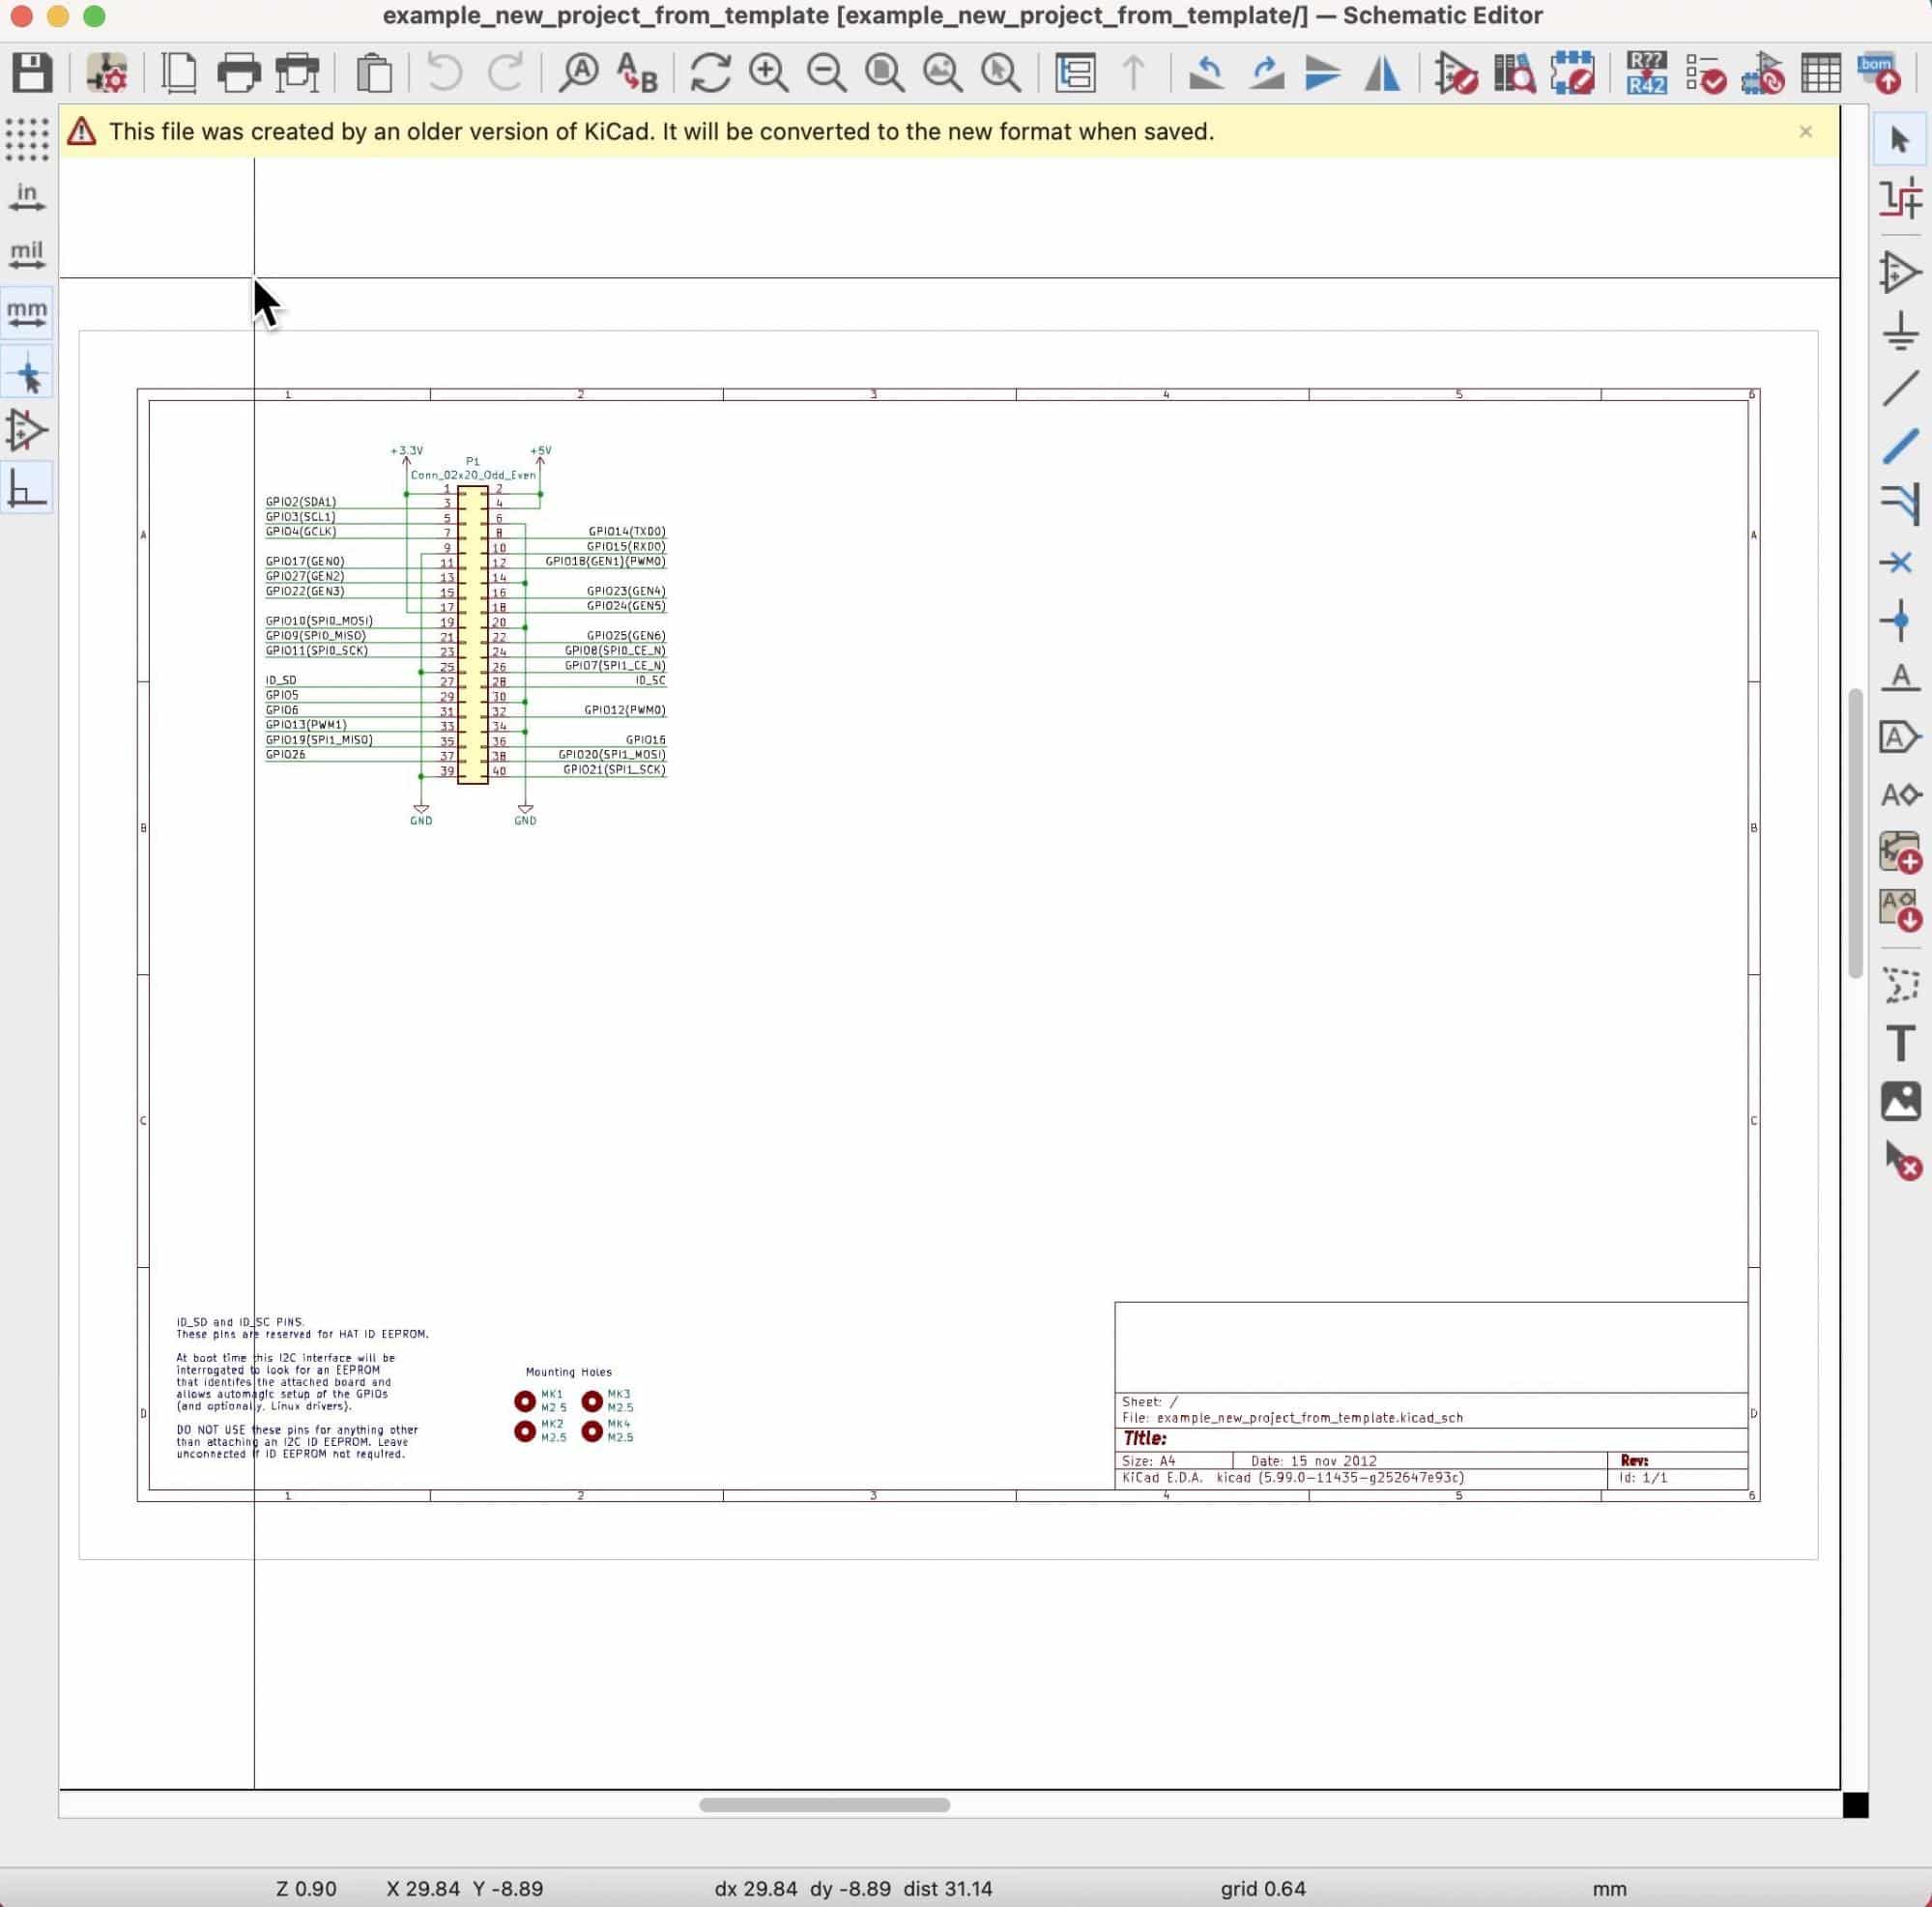 Figure 2.6.4: The new project schematic is already populated with content from the template.